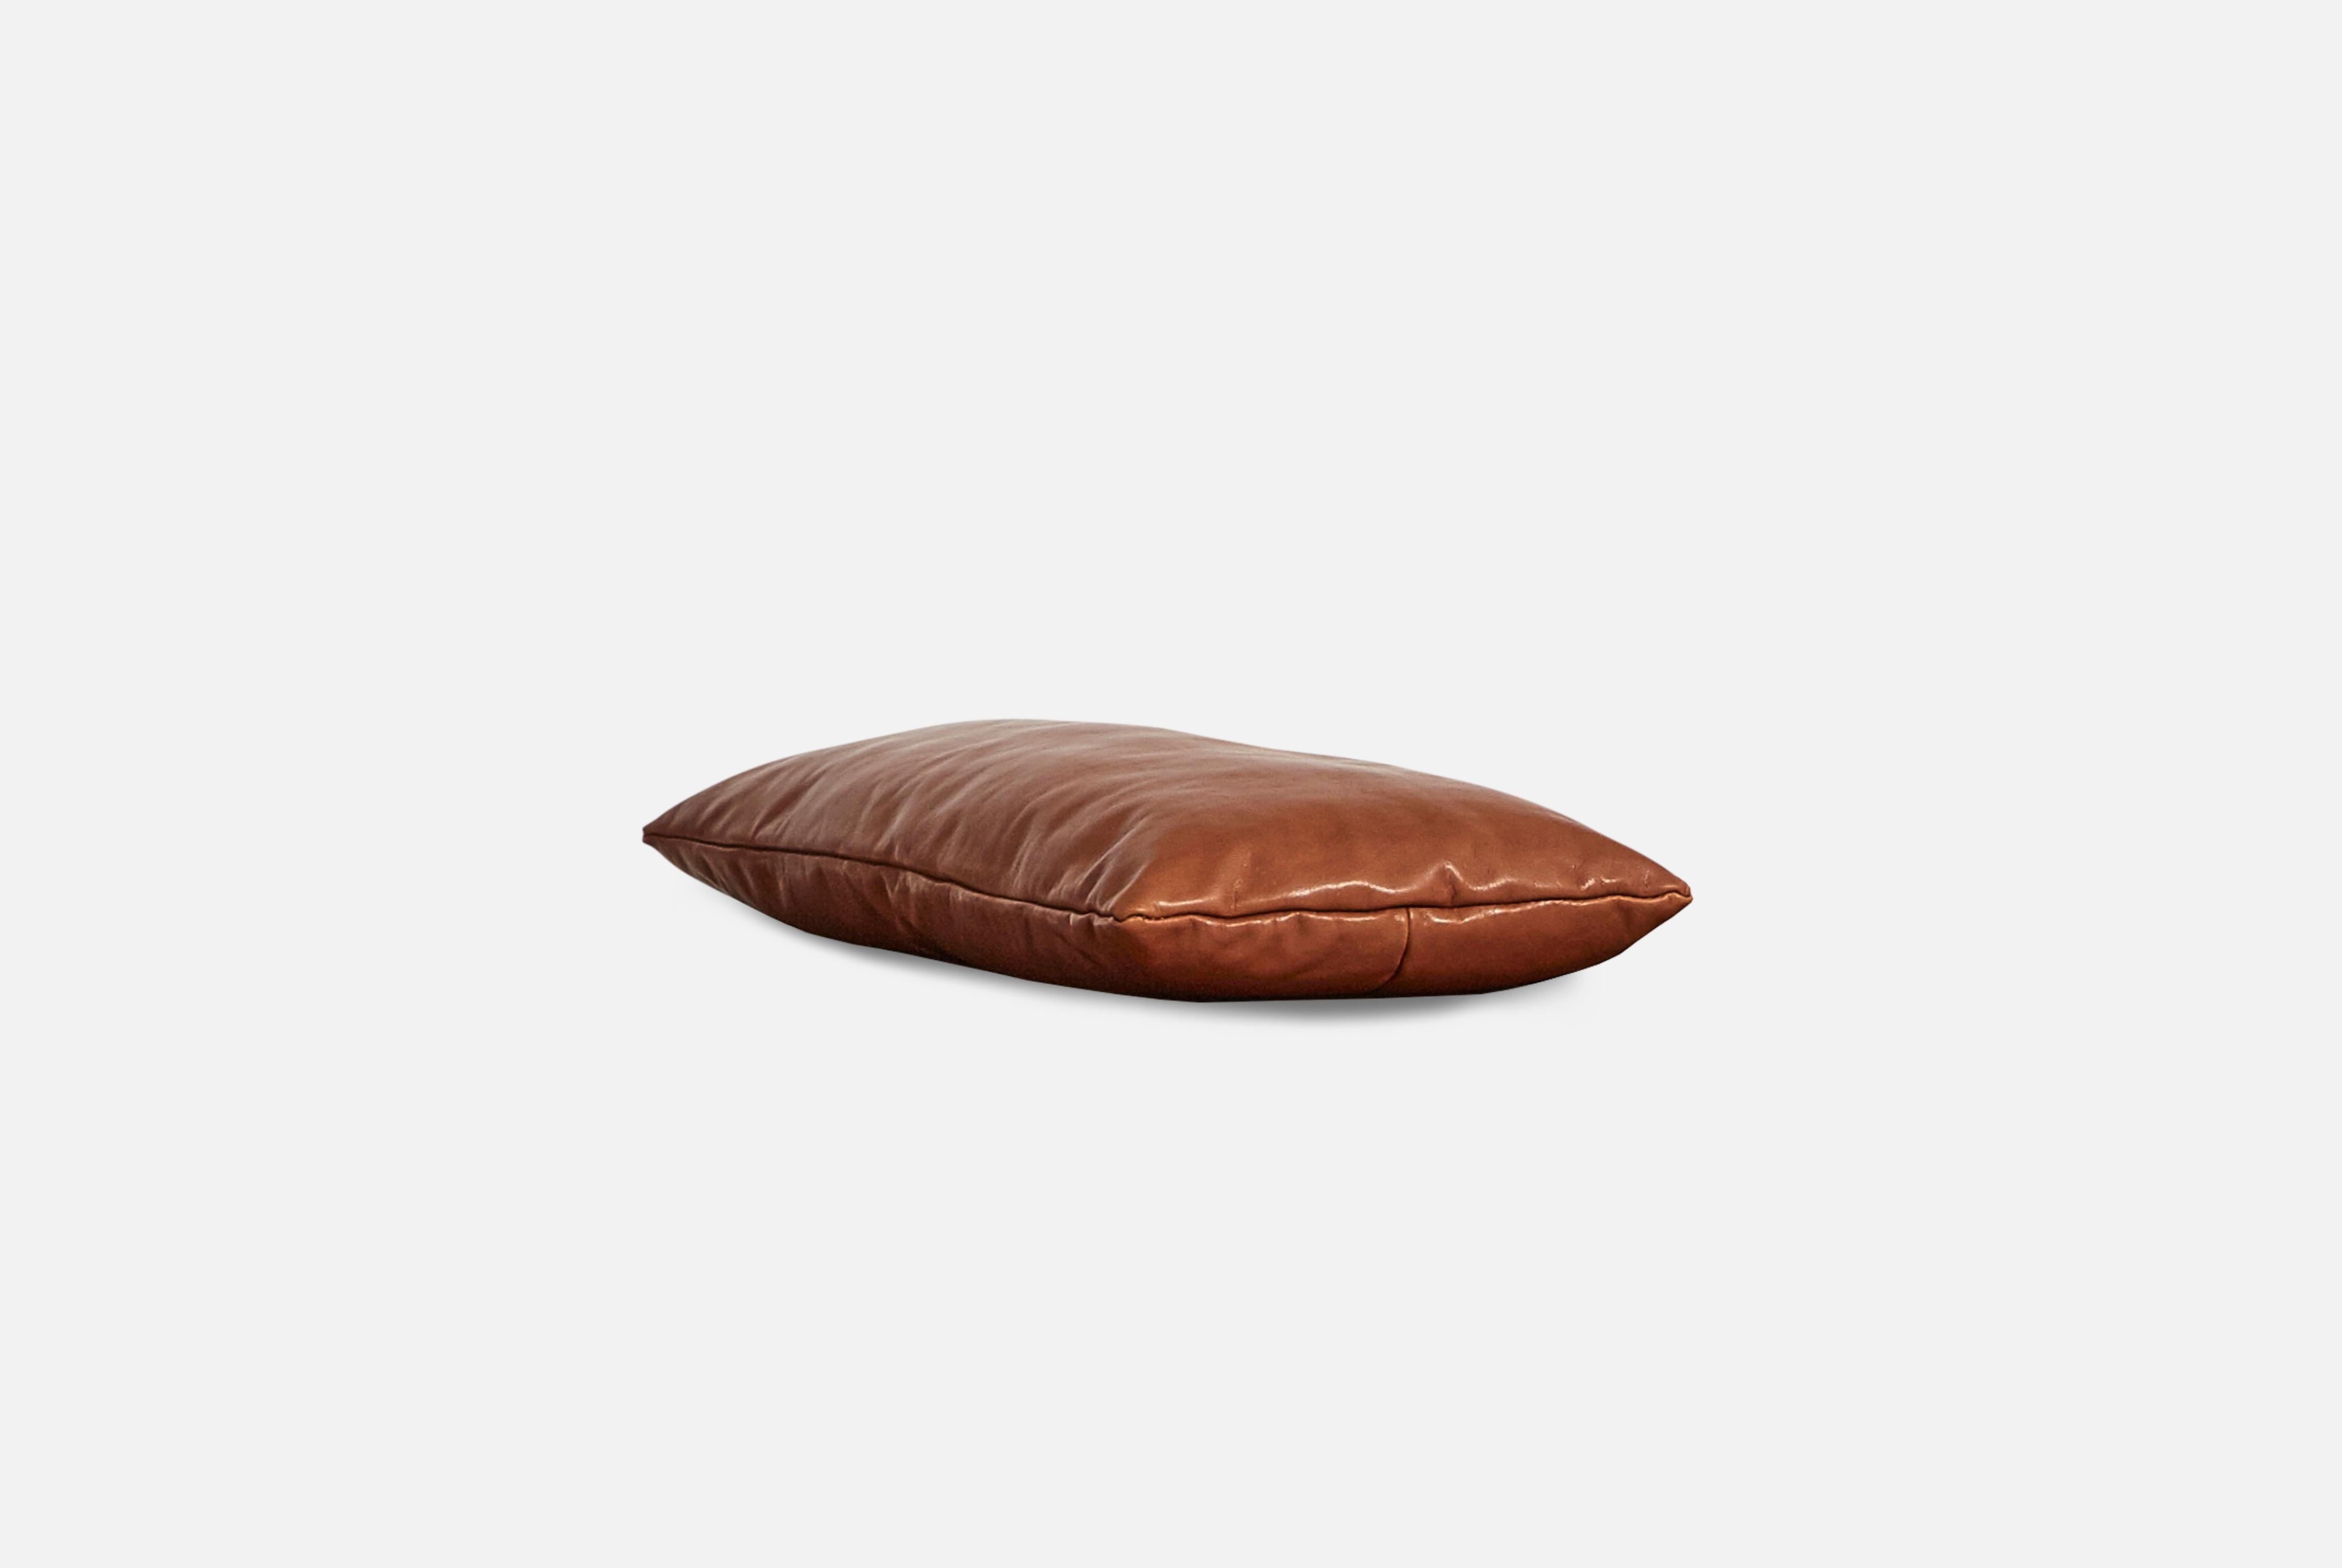 Nought leather level pillow by Msds Studio
Materials: Camo Leather, Fabric
Dimensions: D 23.5 x W 67 x H 8.5 cm

The founders, Mia and Torben Koed, decided to put their 30 years of experience into a new project. It was time for a change and a